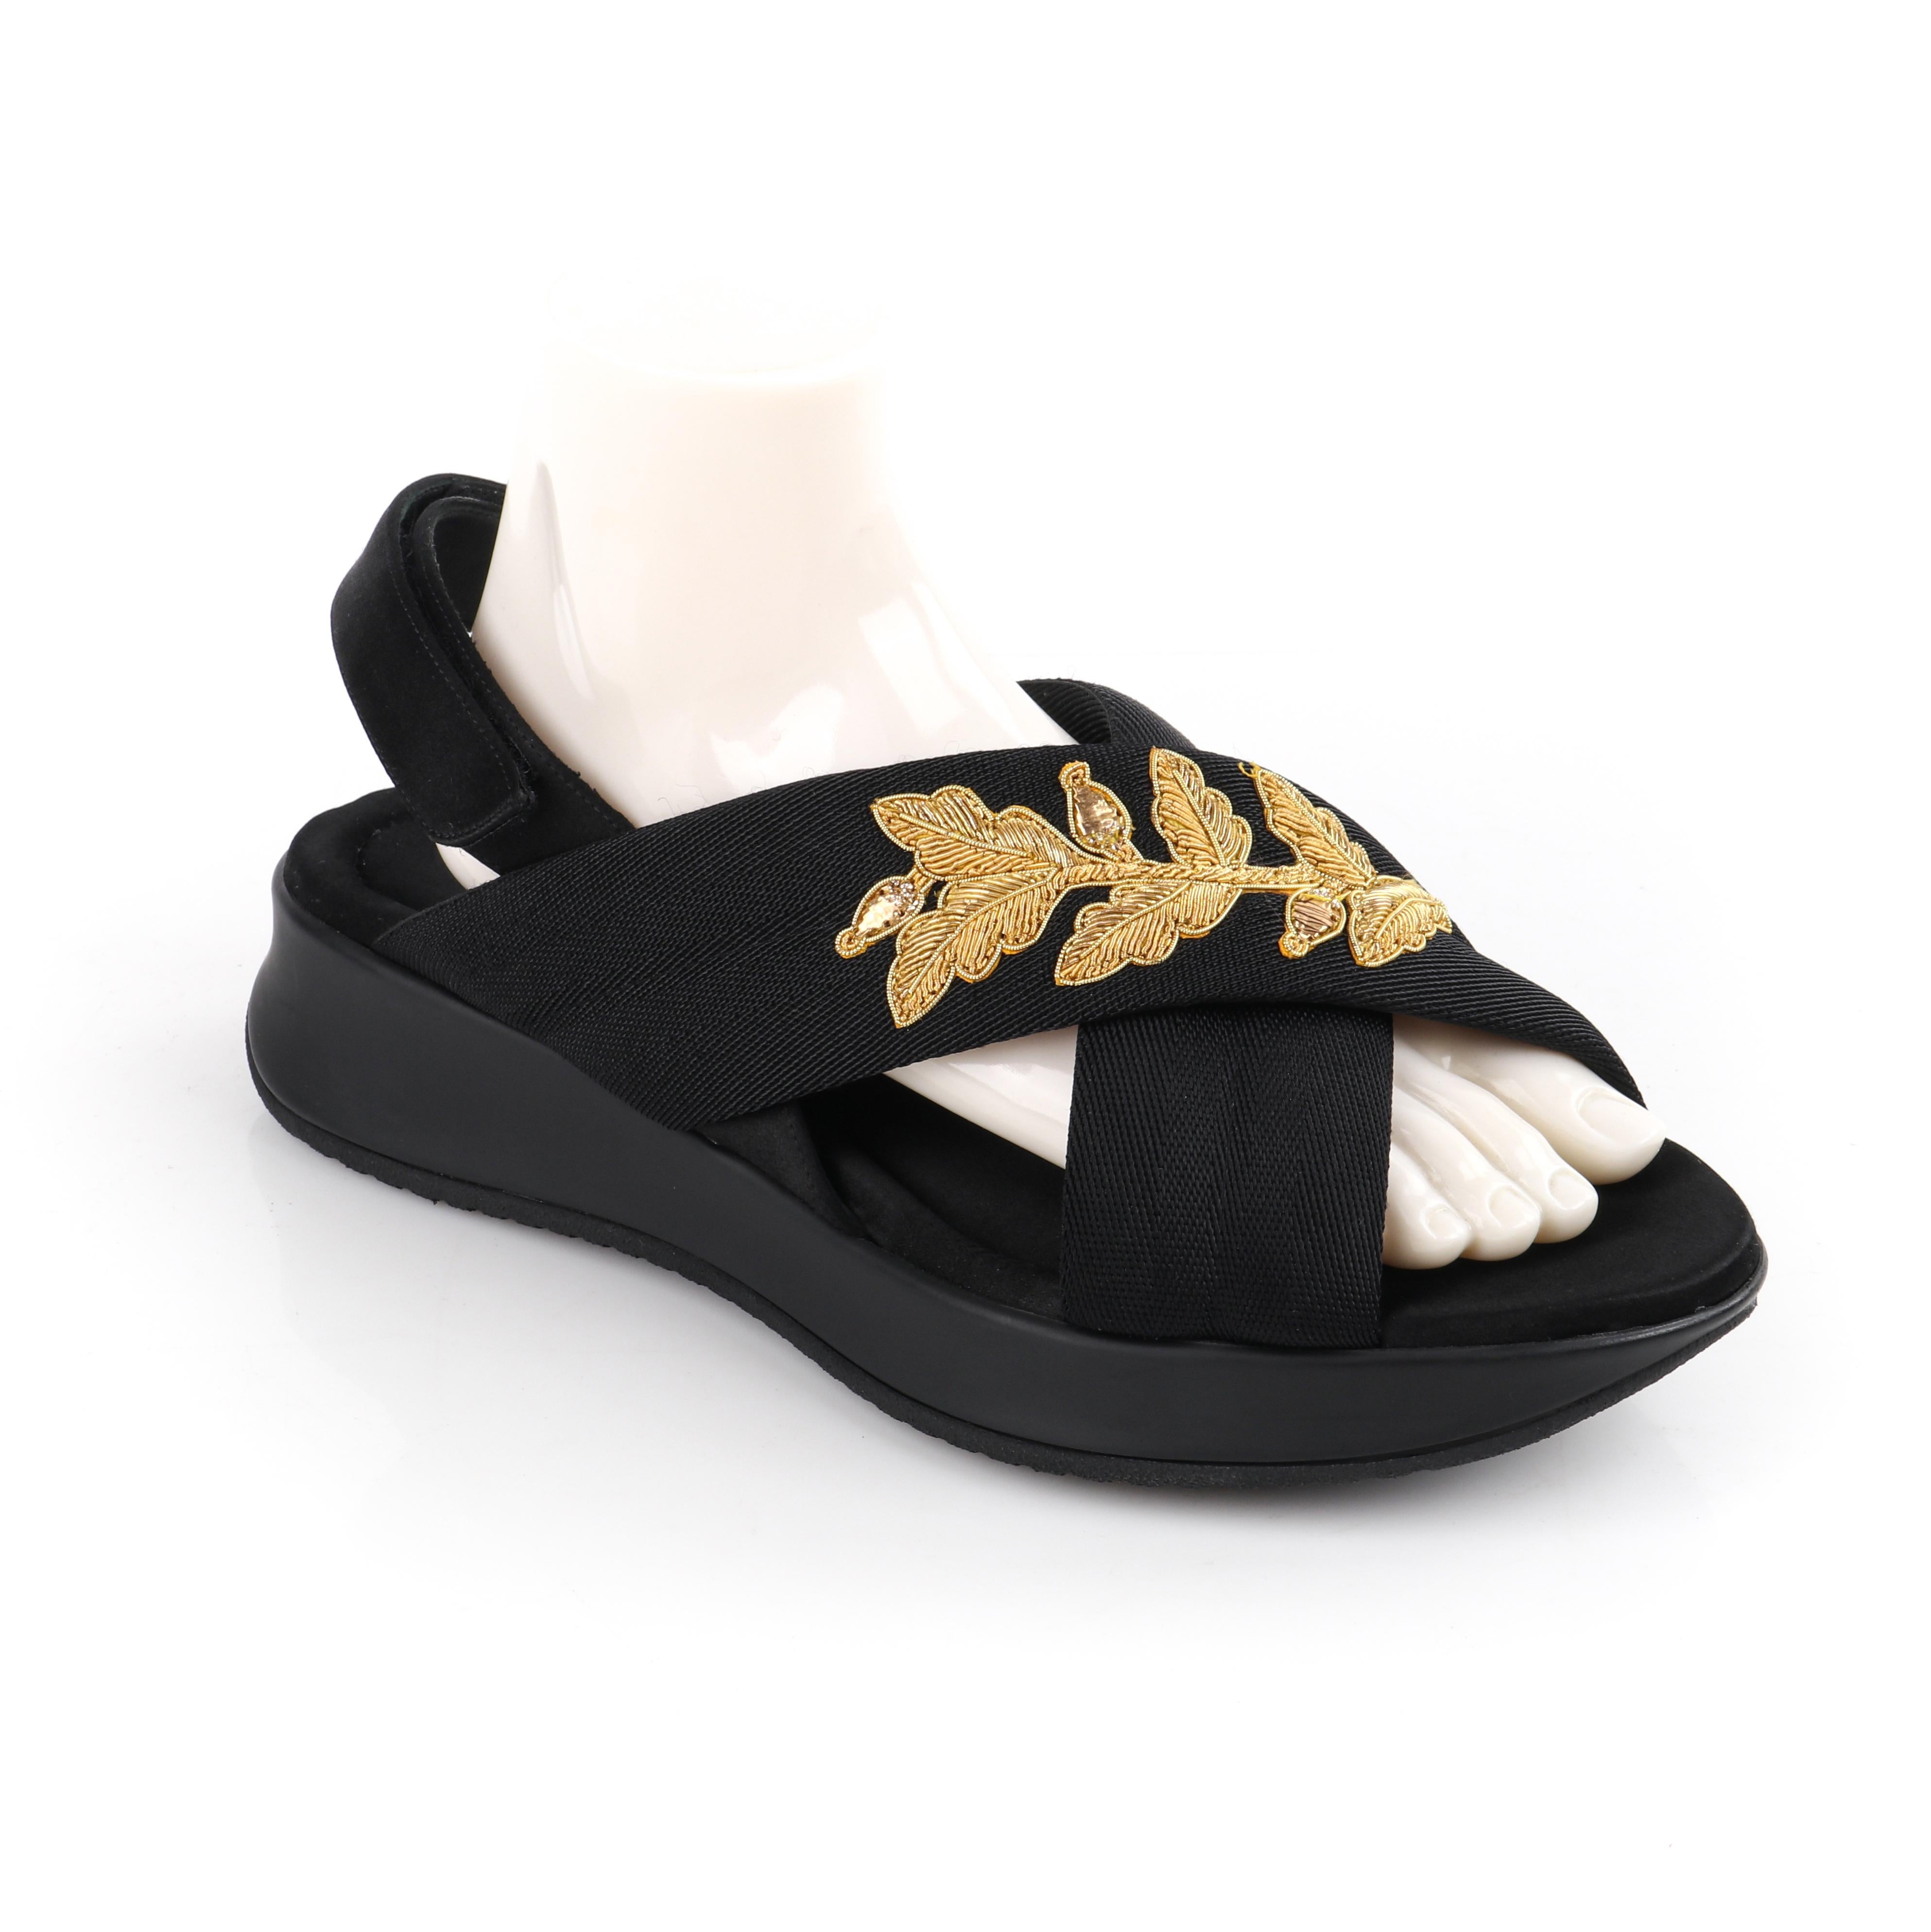 burberry embroidered sandals